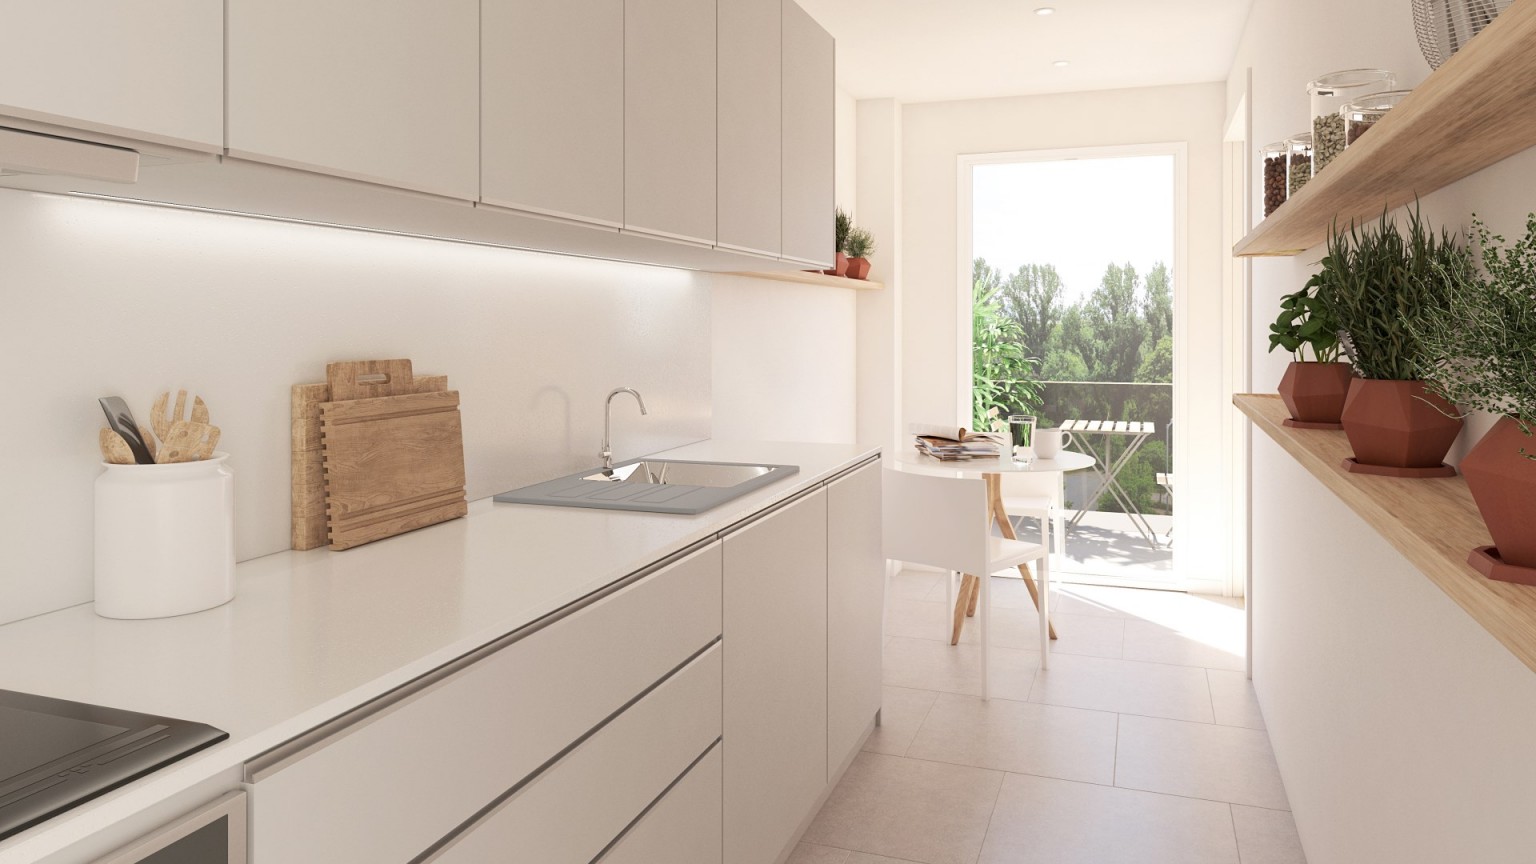 New construction apartment for sale, in the Domeny area of ​​Girona.